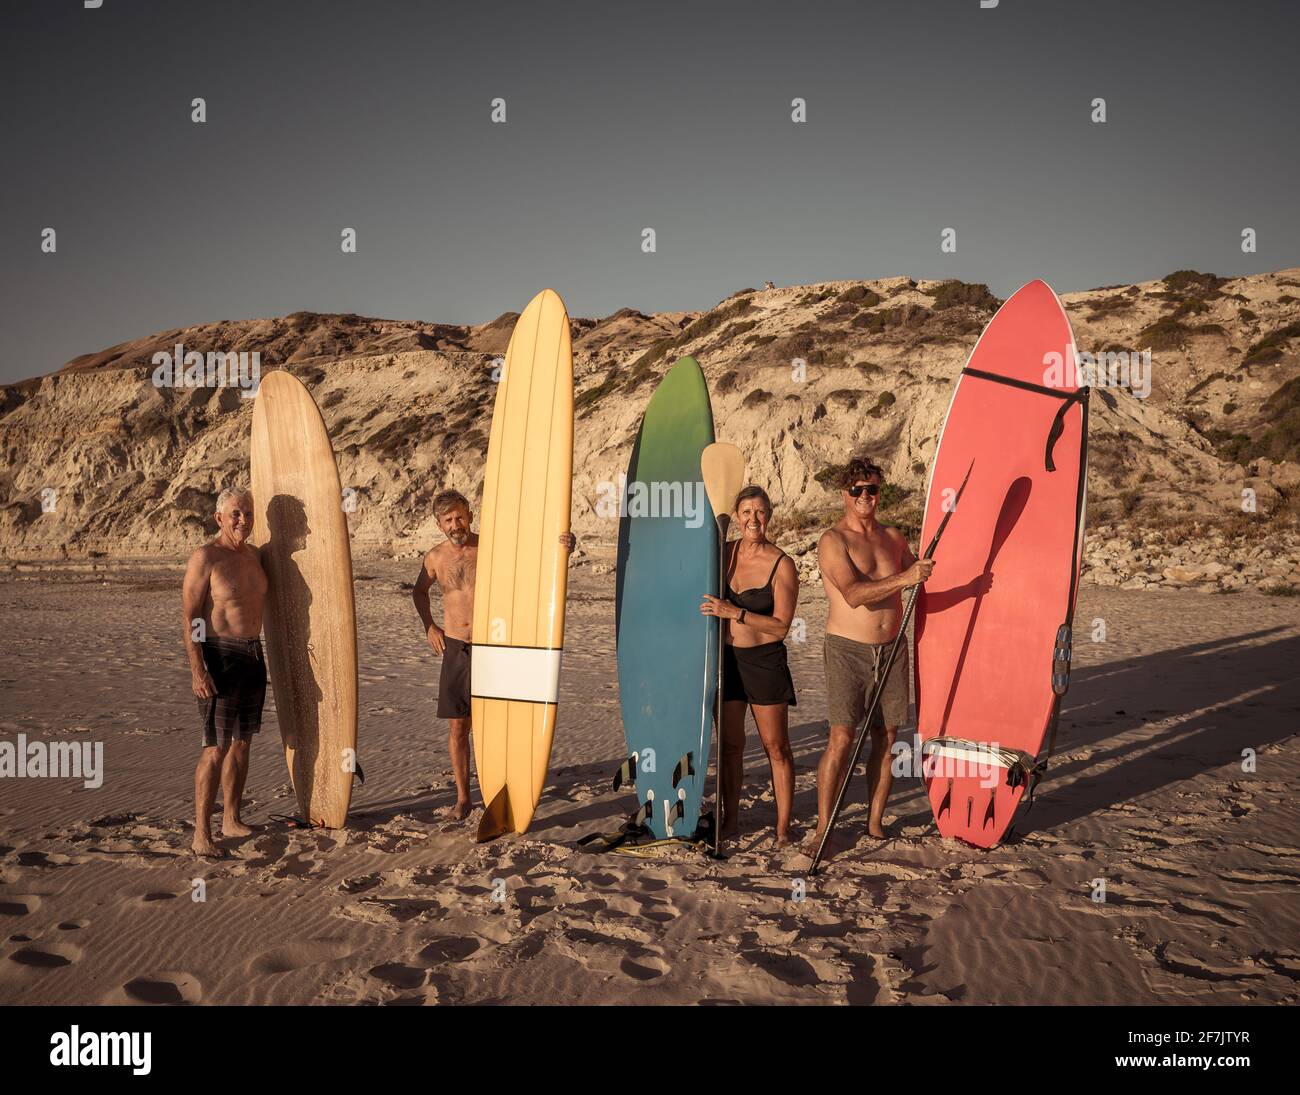 Group of senior surfers, woman and men, holding their colorful surfboards on remote beach. Mature retired friends enjoying surfing and outdoors lifest Stock Photo